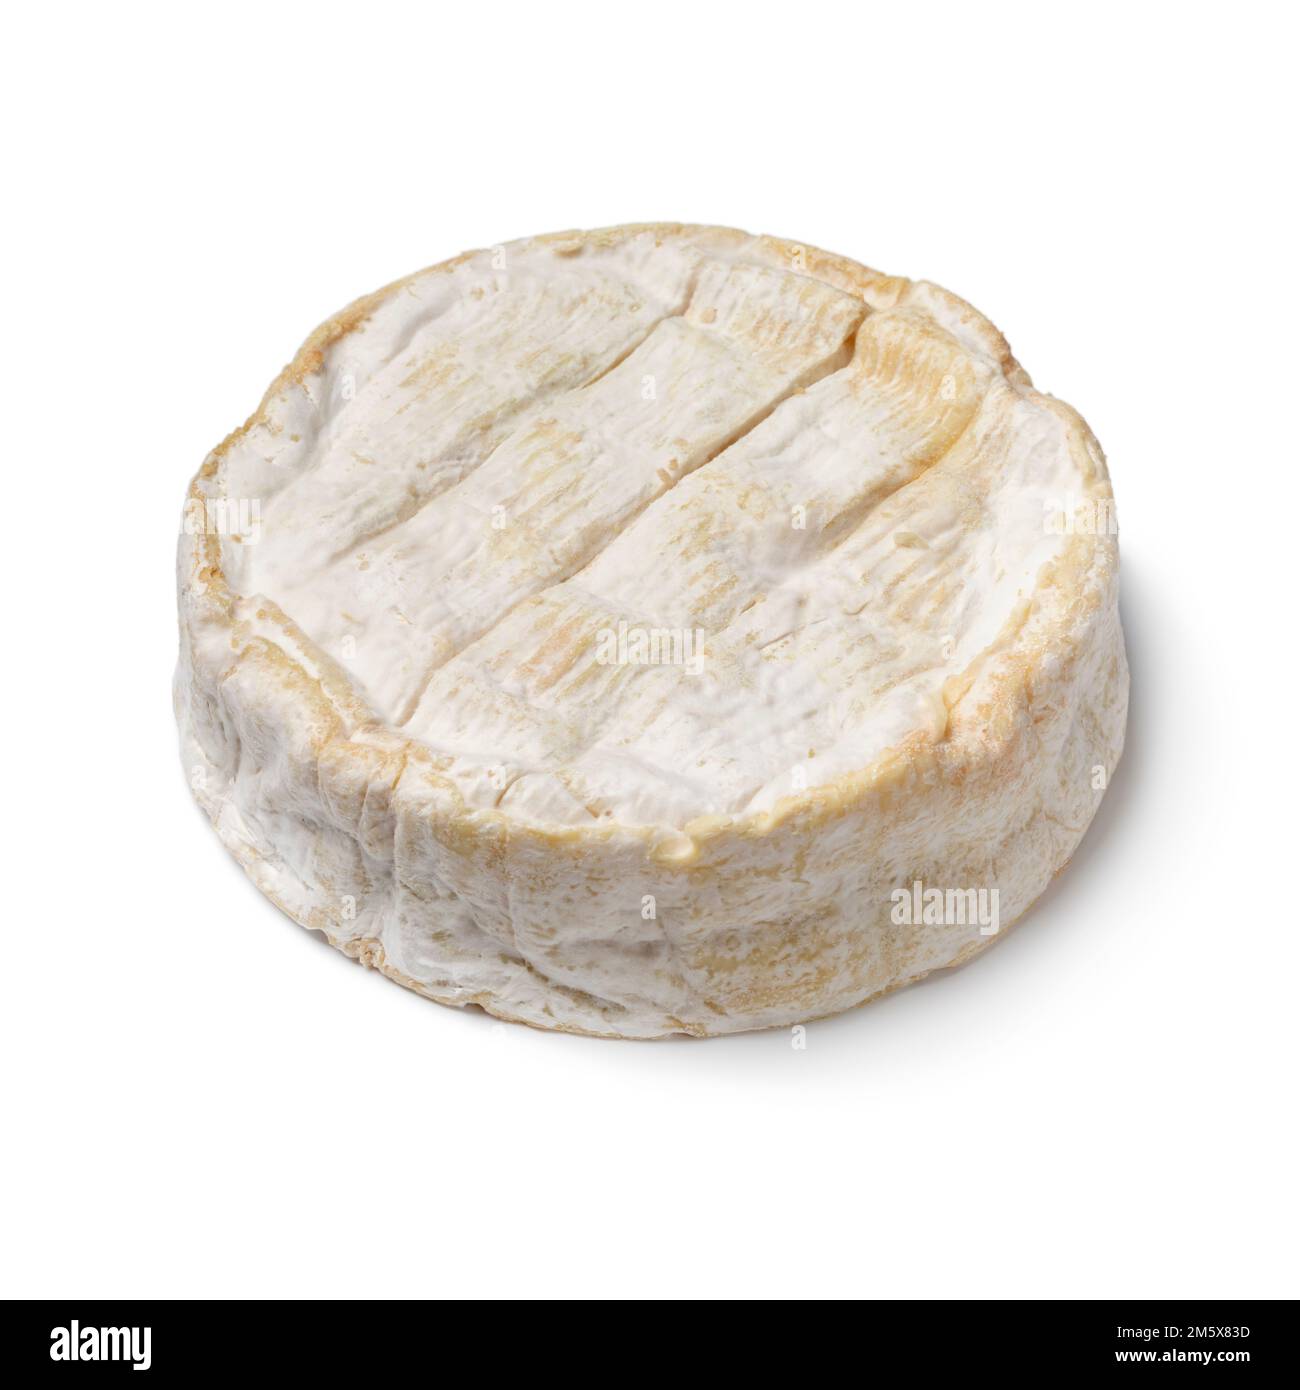 Whole French Camembert cheese isolated on white background close up Stock Photo